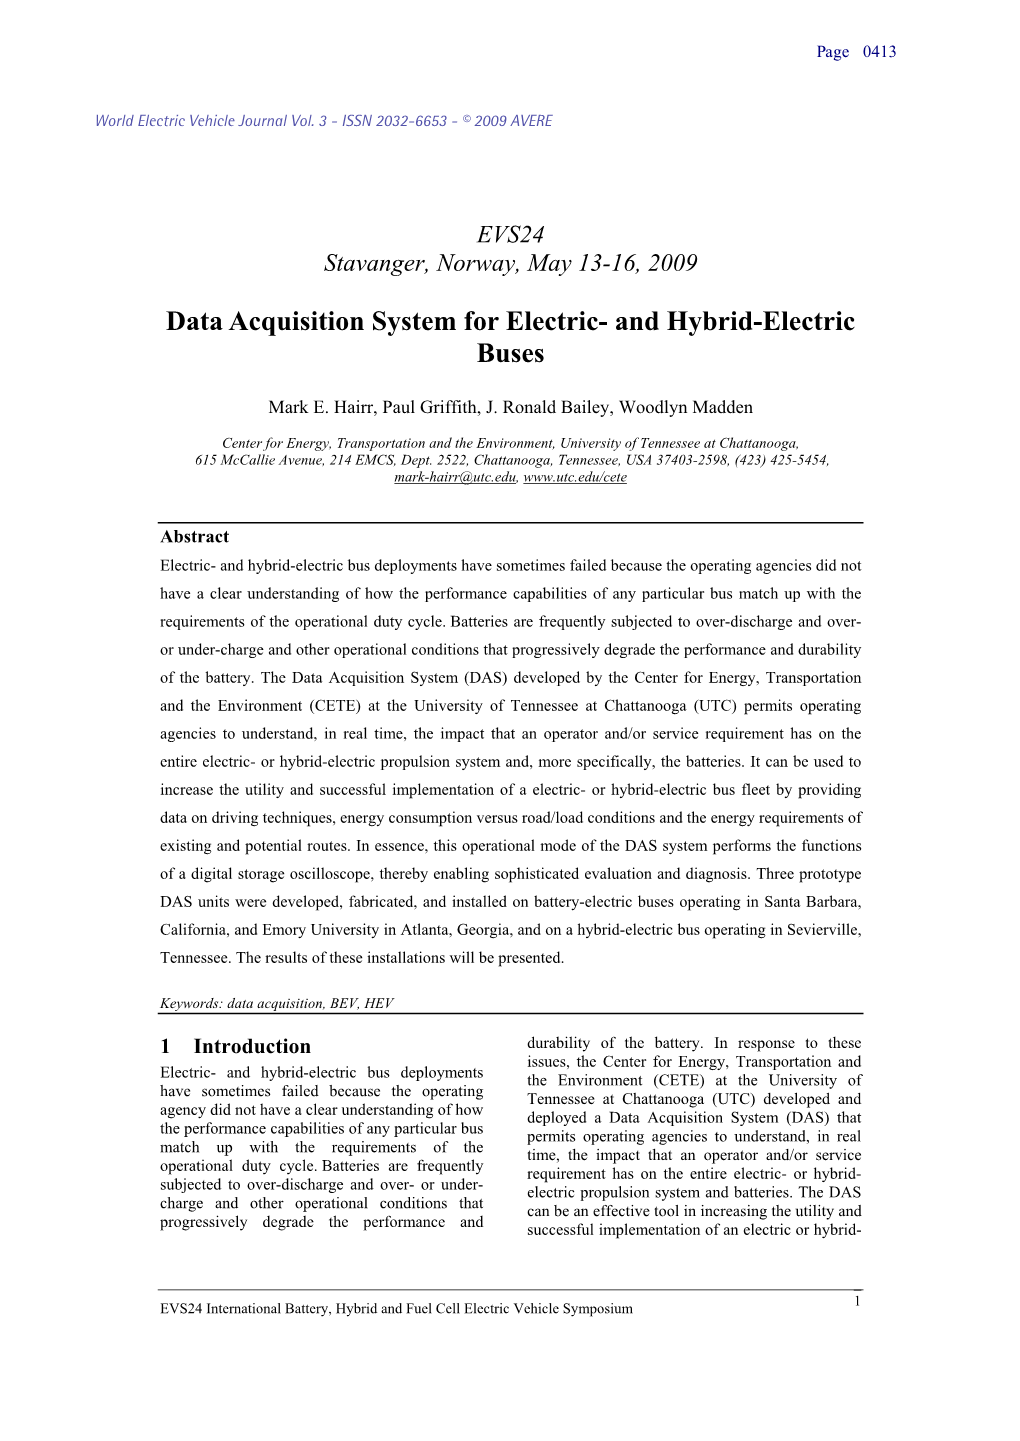 Data Acquisition System for Electric- and Hybrid-Electric Buses